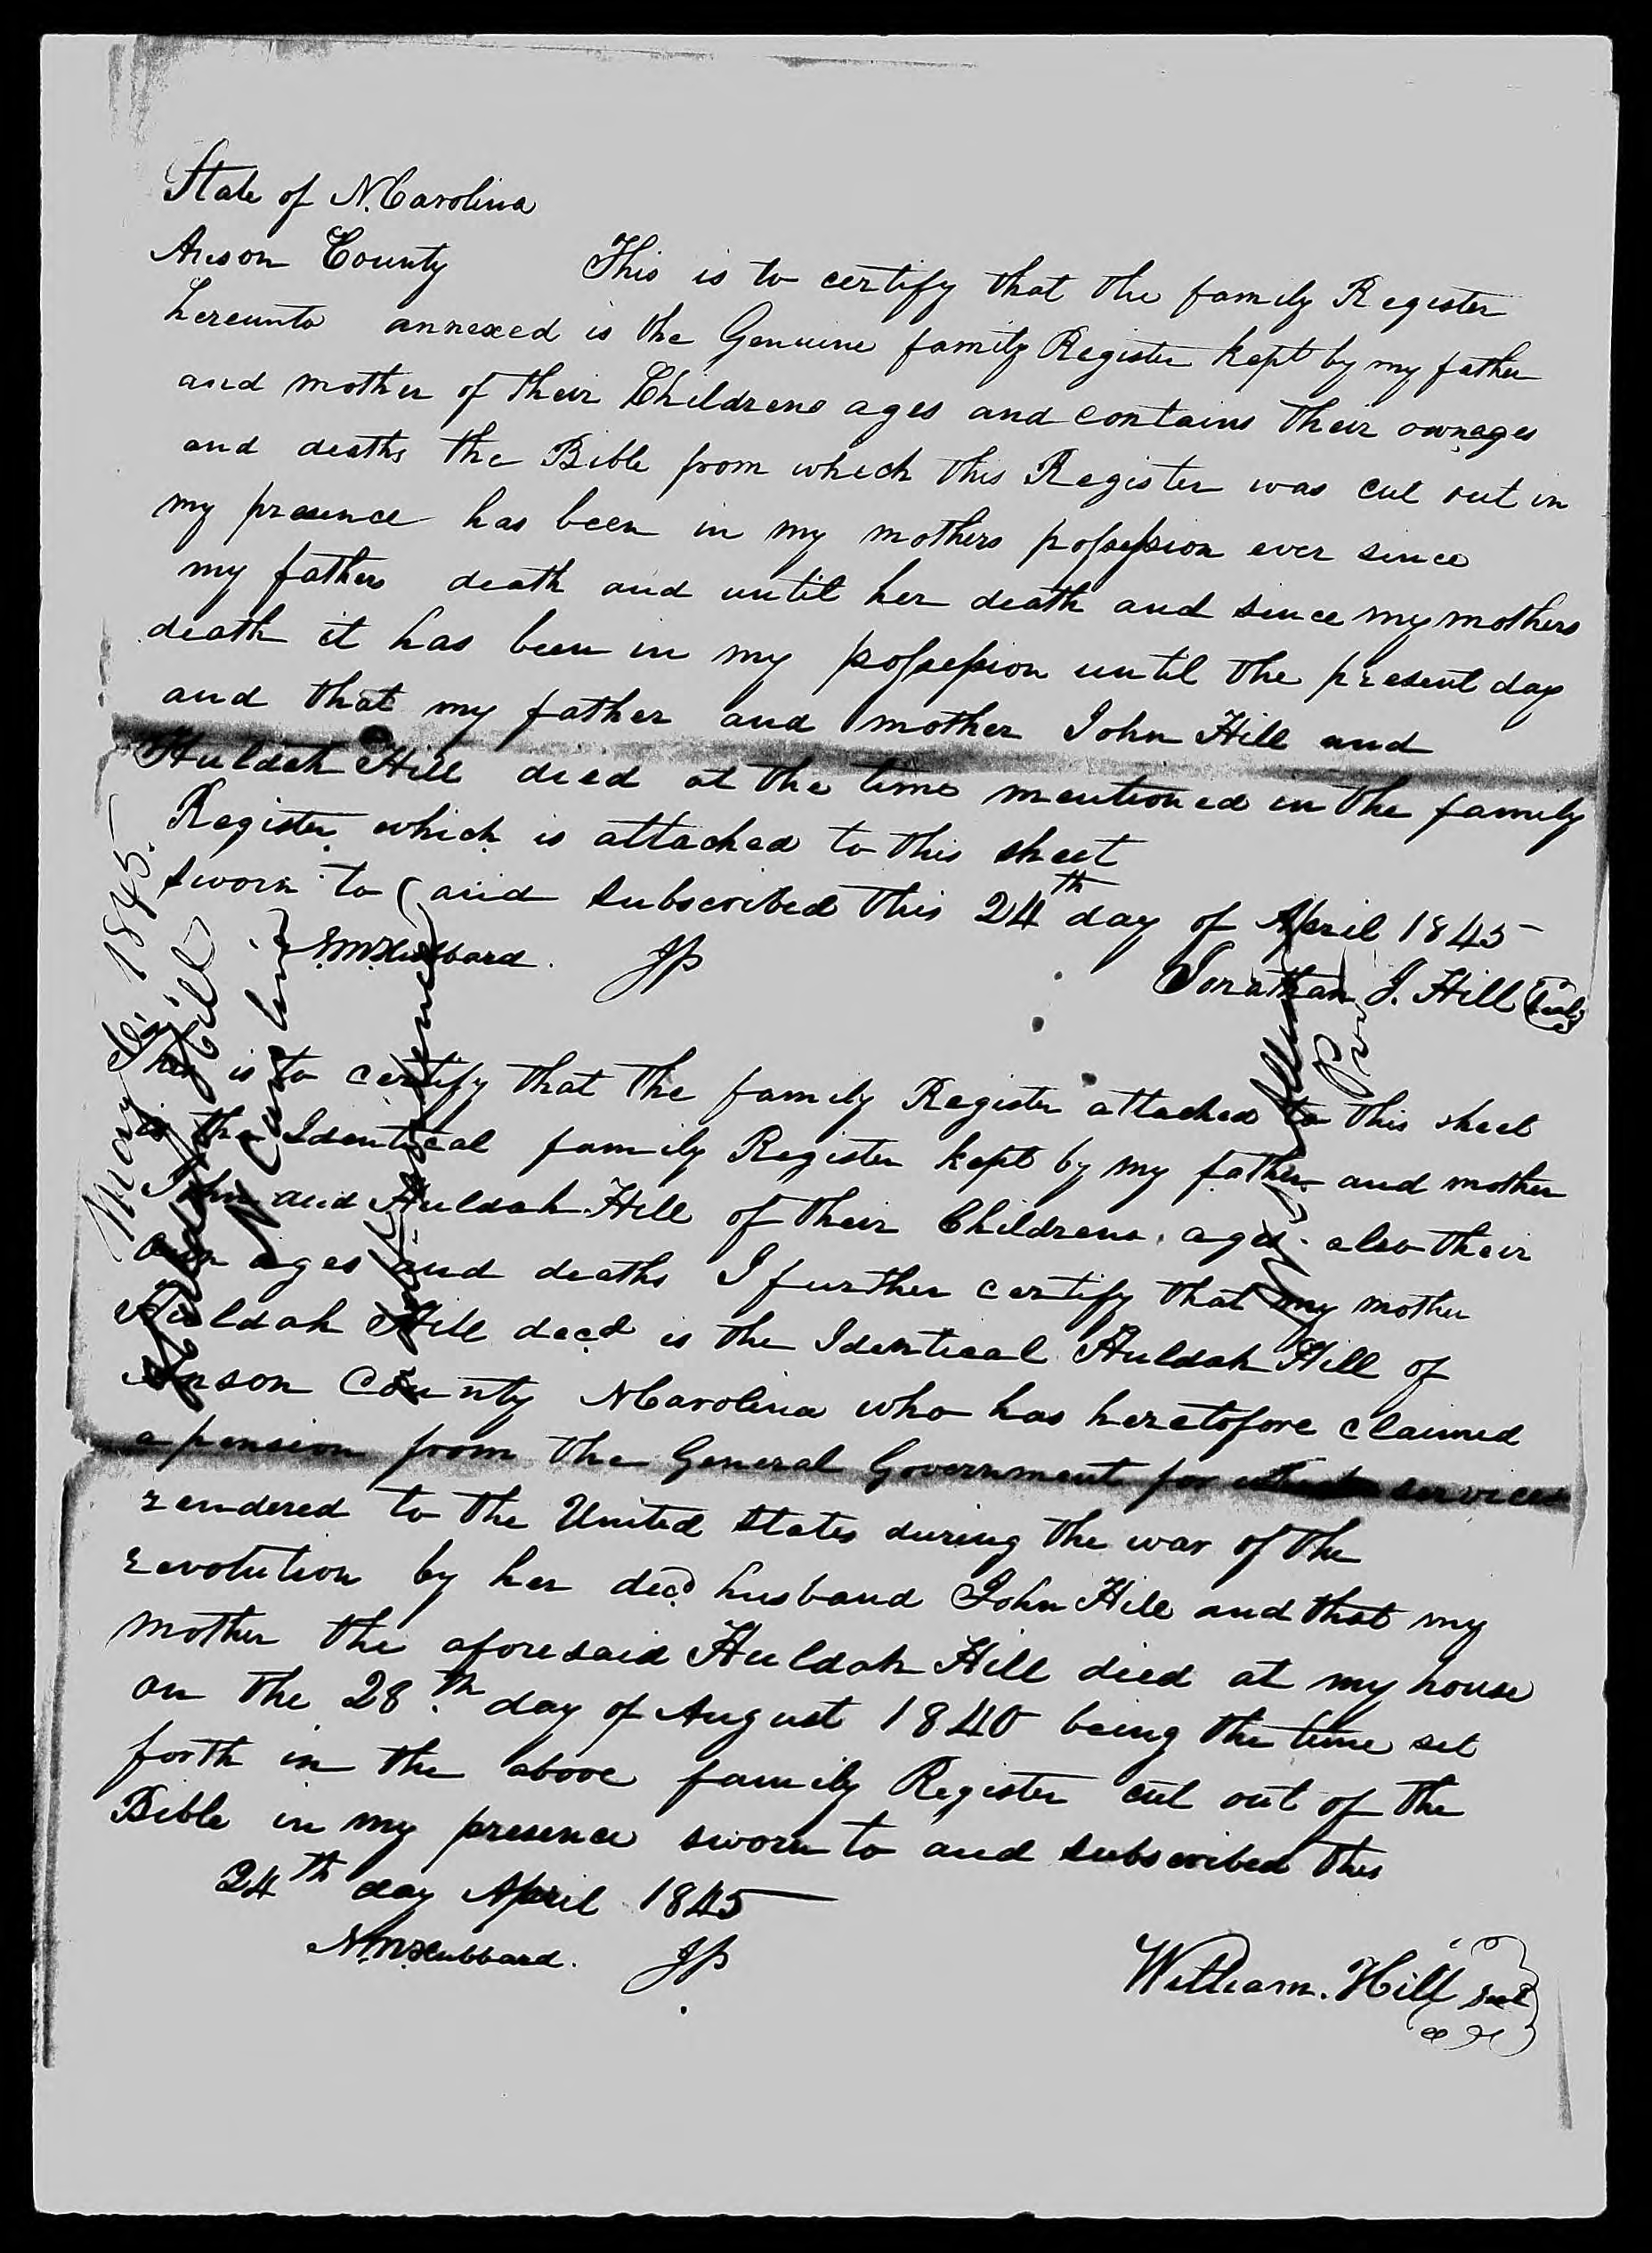 Affidavit of Jonathan J. Hill and William Hill in support of a Pension Claim for Huldah Hill, 24 April 1845, page 1